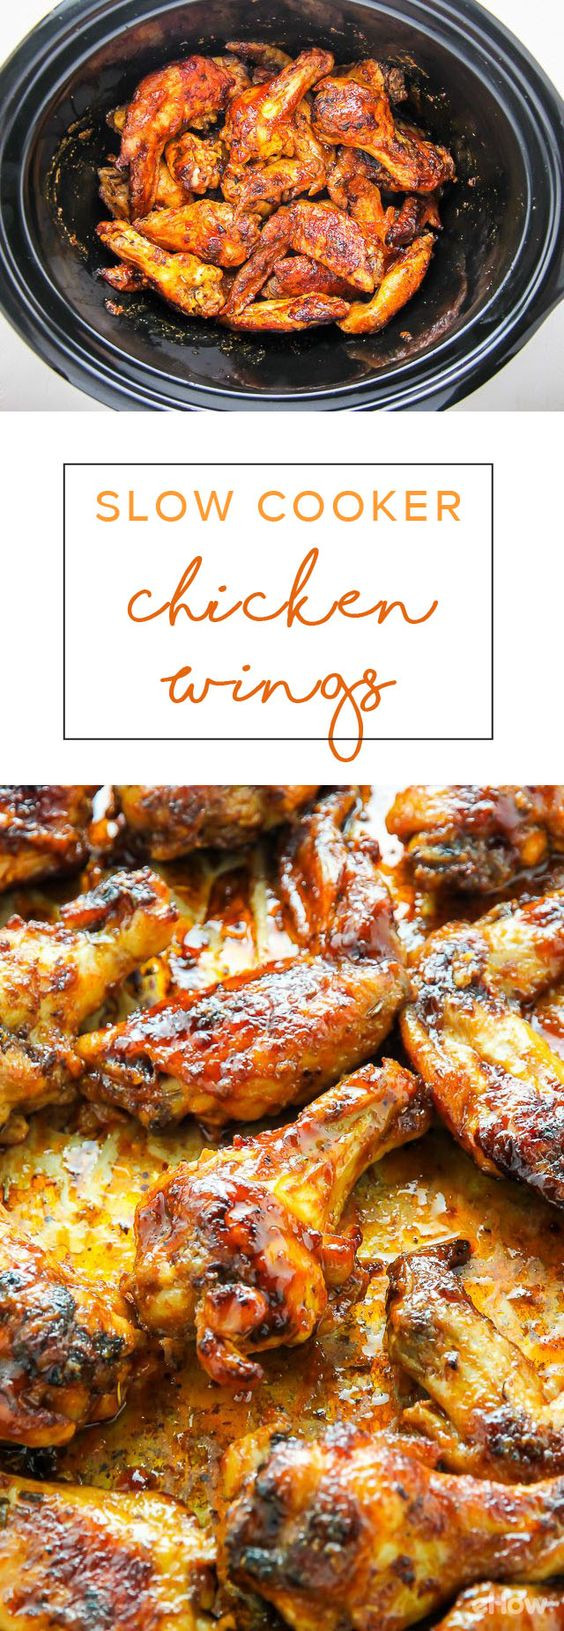 Chicken Wings Slow Cooker
 Smart Slow Cooker Recipes